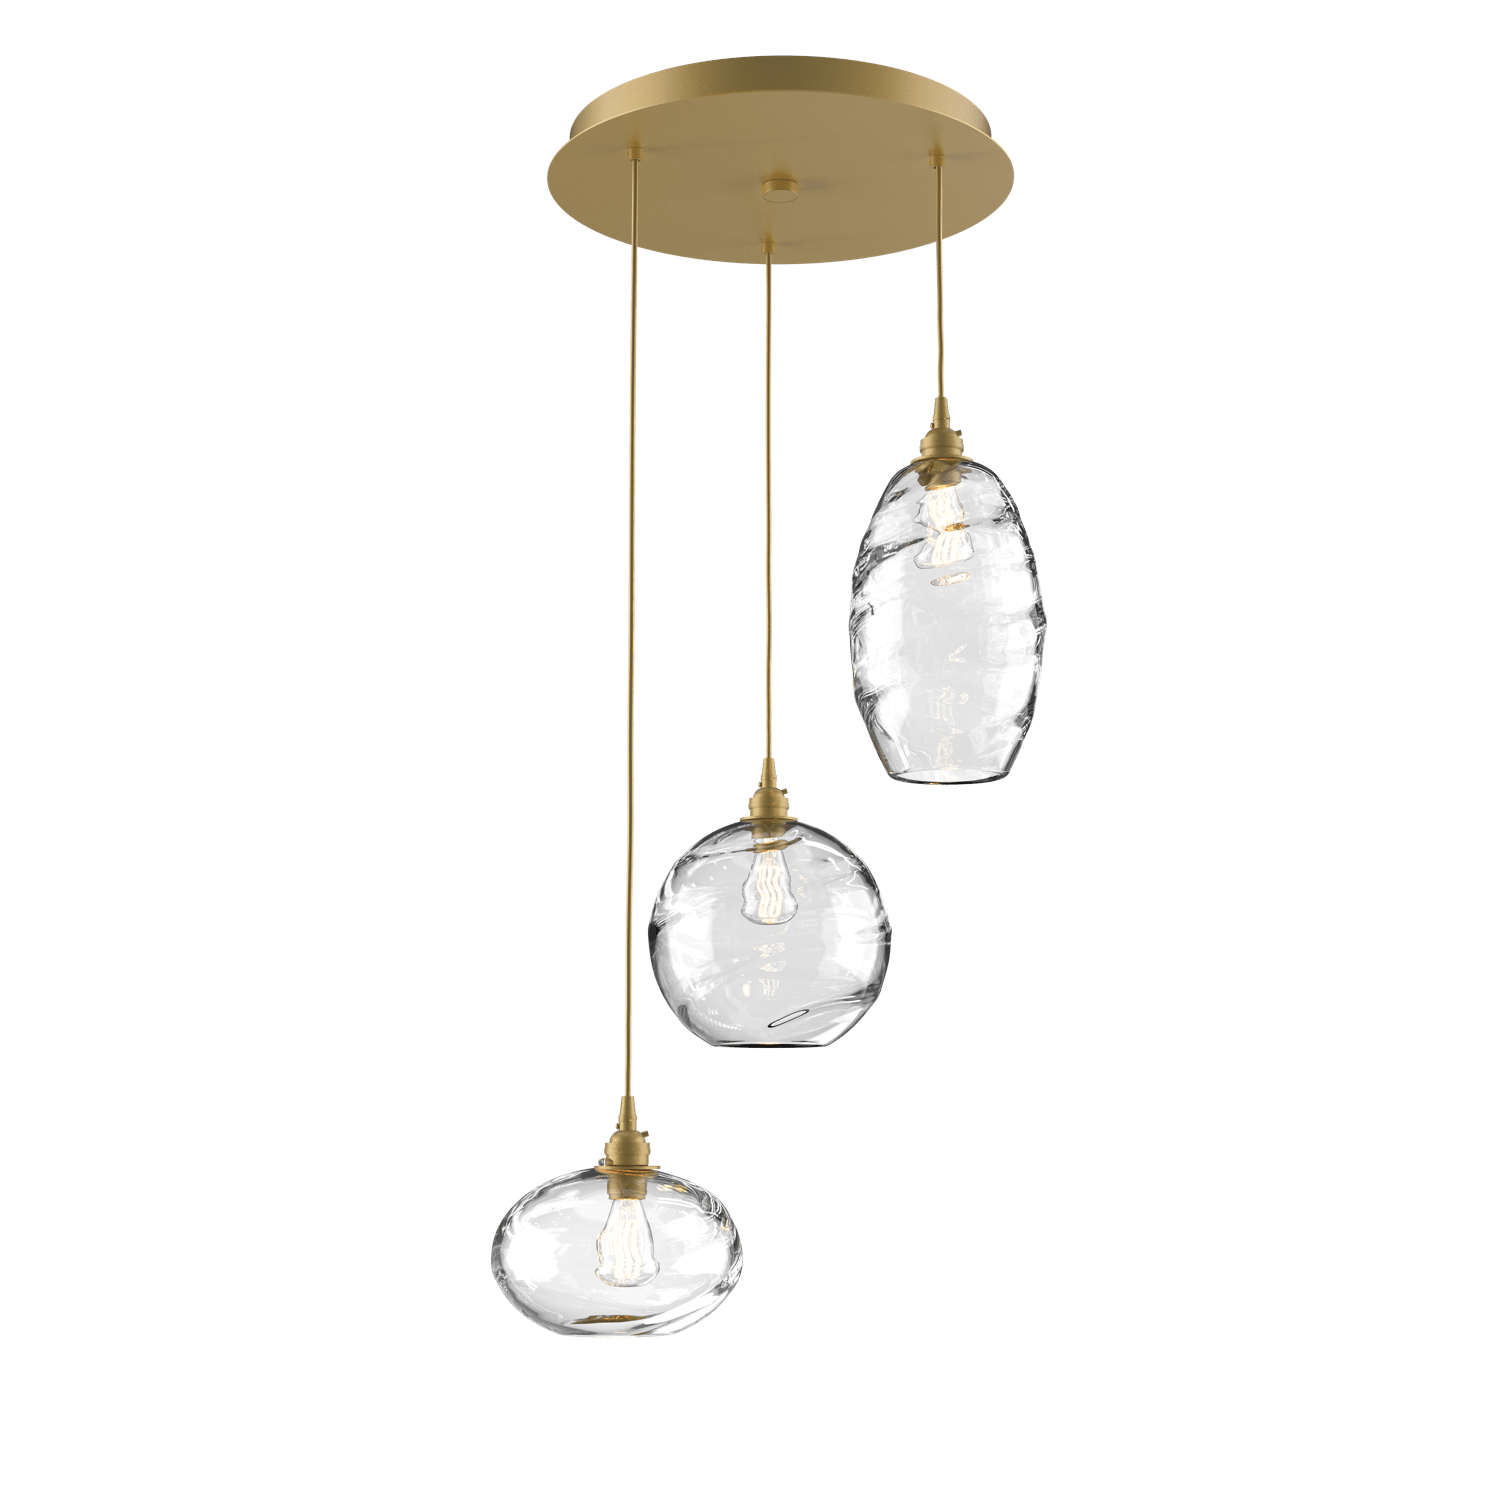 CHB0048-03-GB-OC-Hammerton-Studio-Optic-Blown-Glass-Misto-3-light-round-pendant-chandelier-with-gilded-brass-finish-and-optic-clear-blown-glass-shades-and-incandescent-lamping